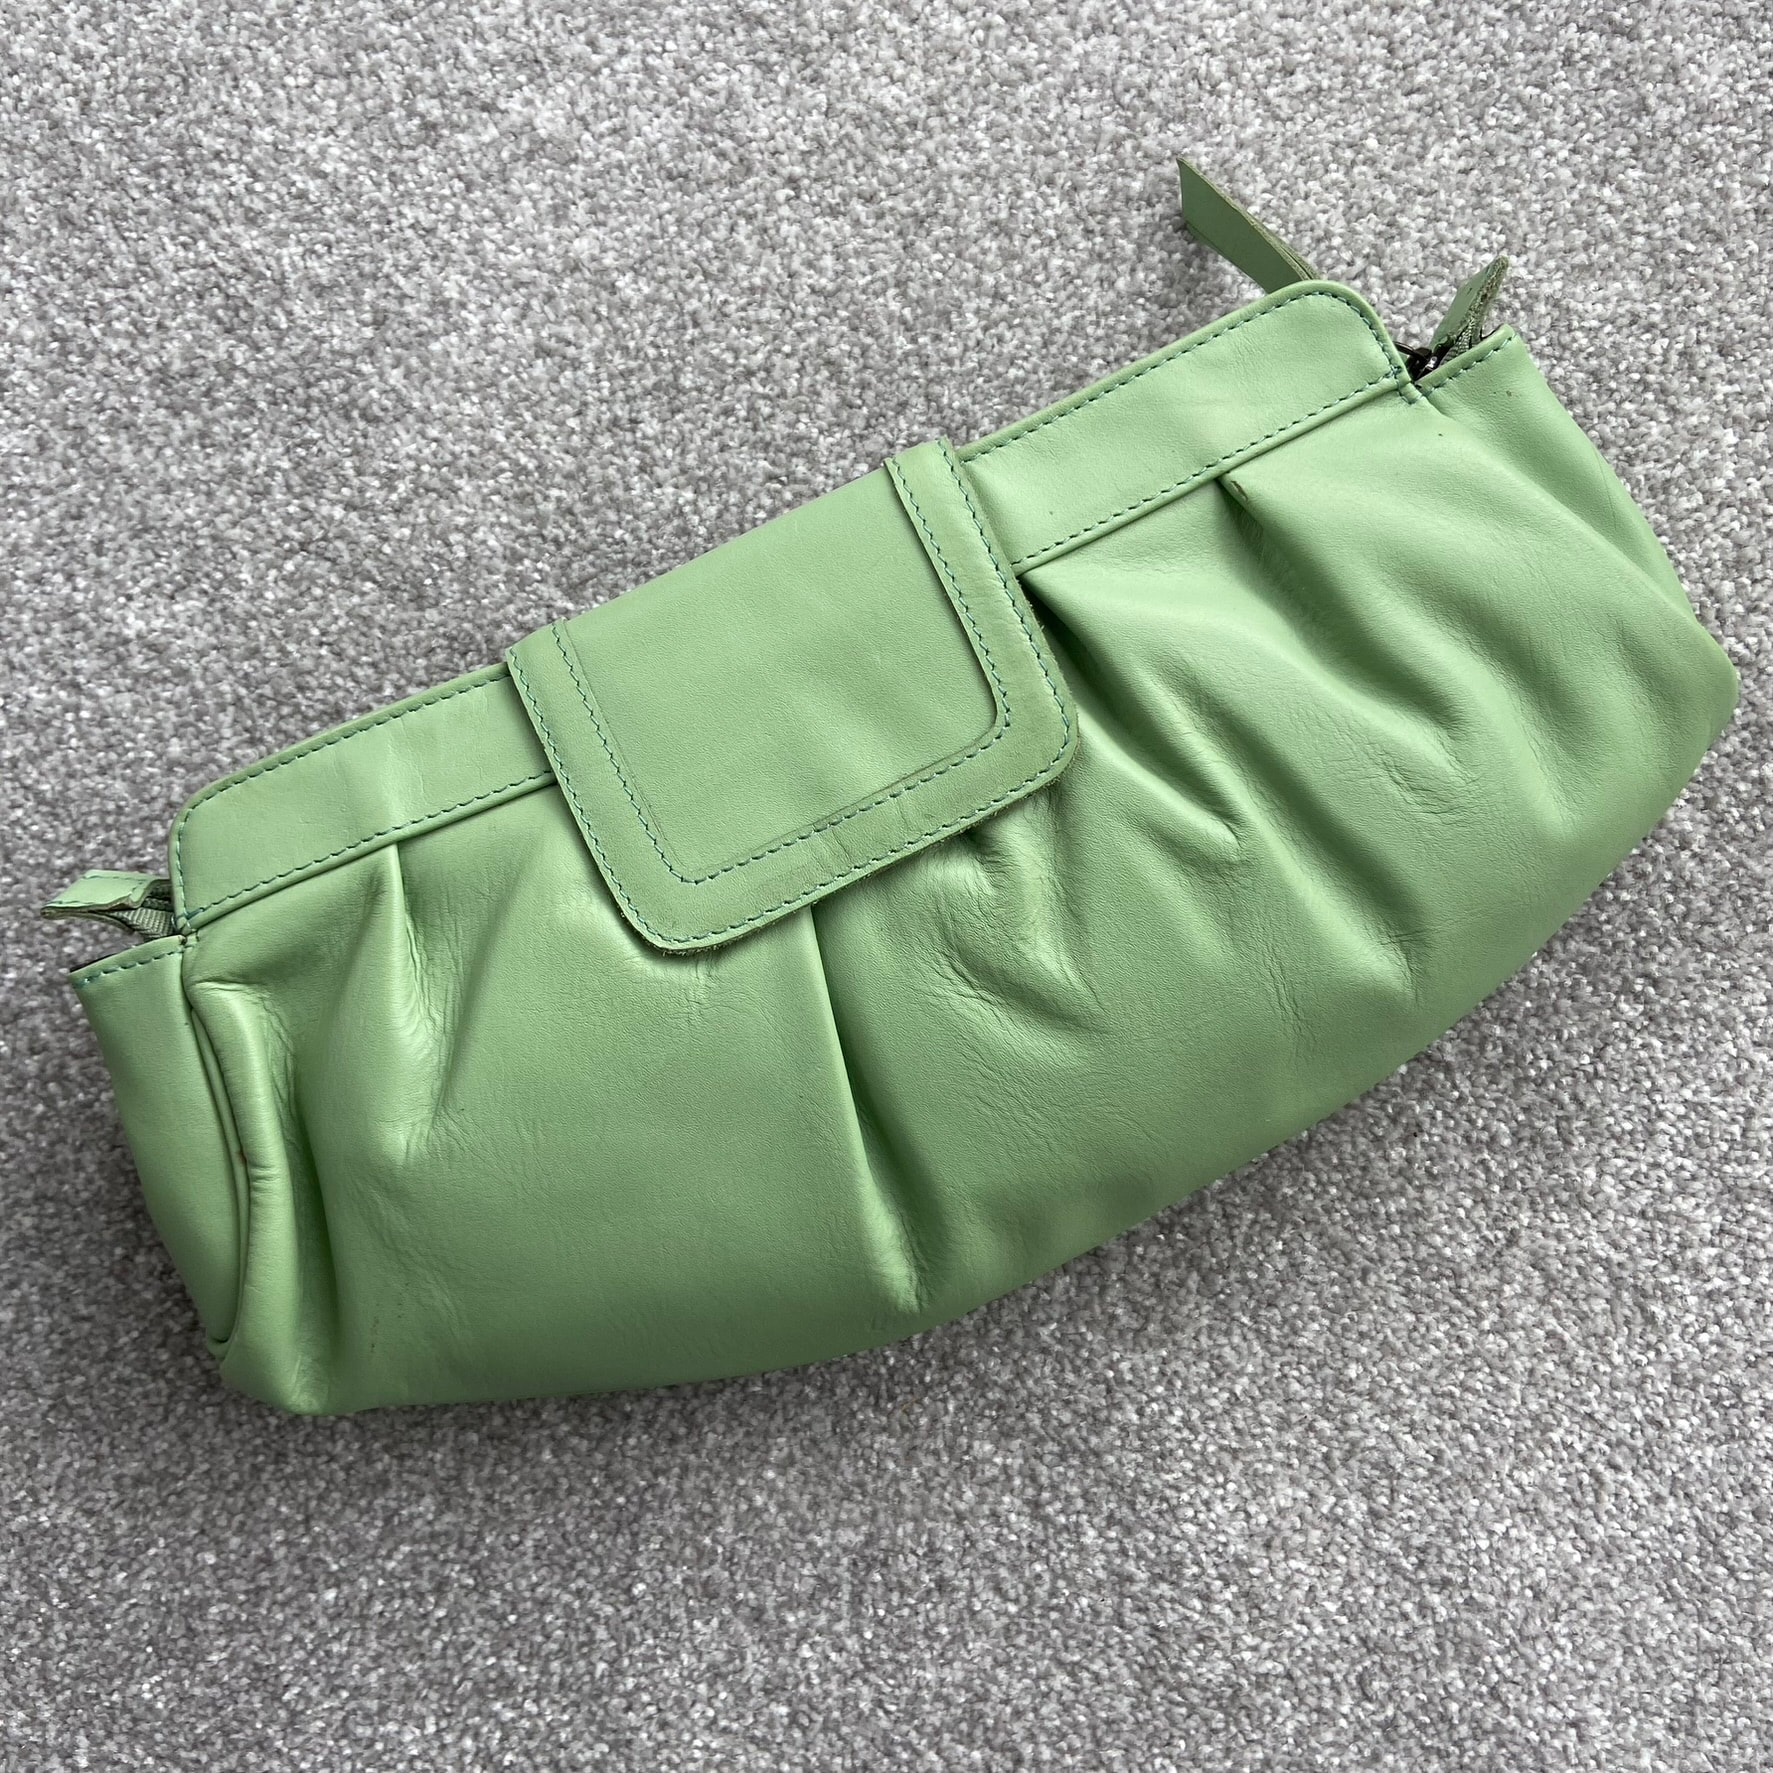 Large Green Leather Clutch Bag